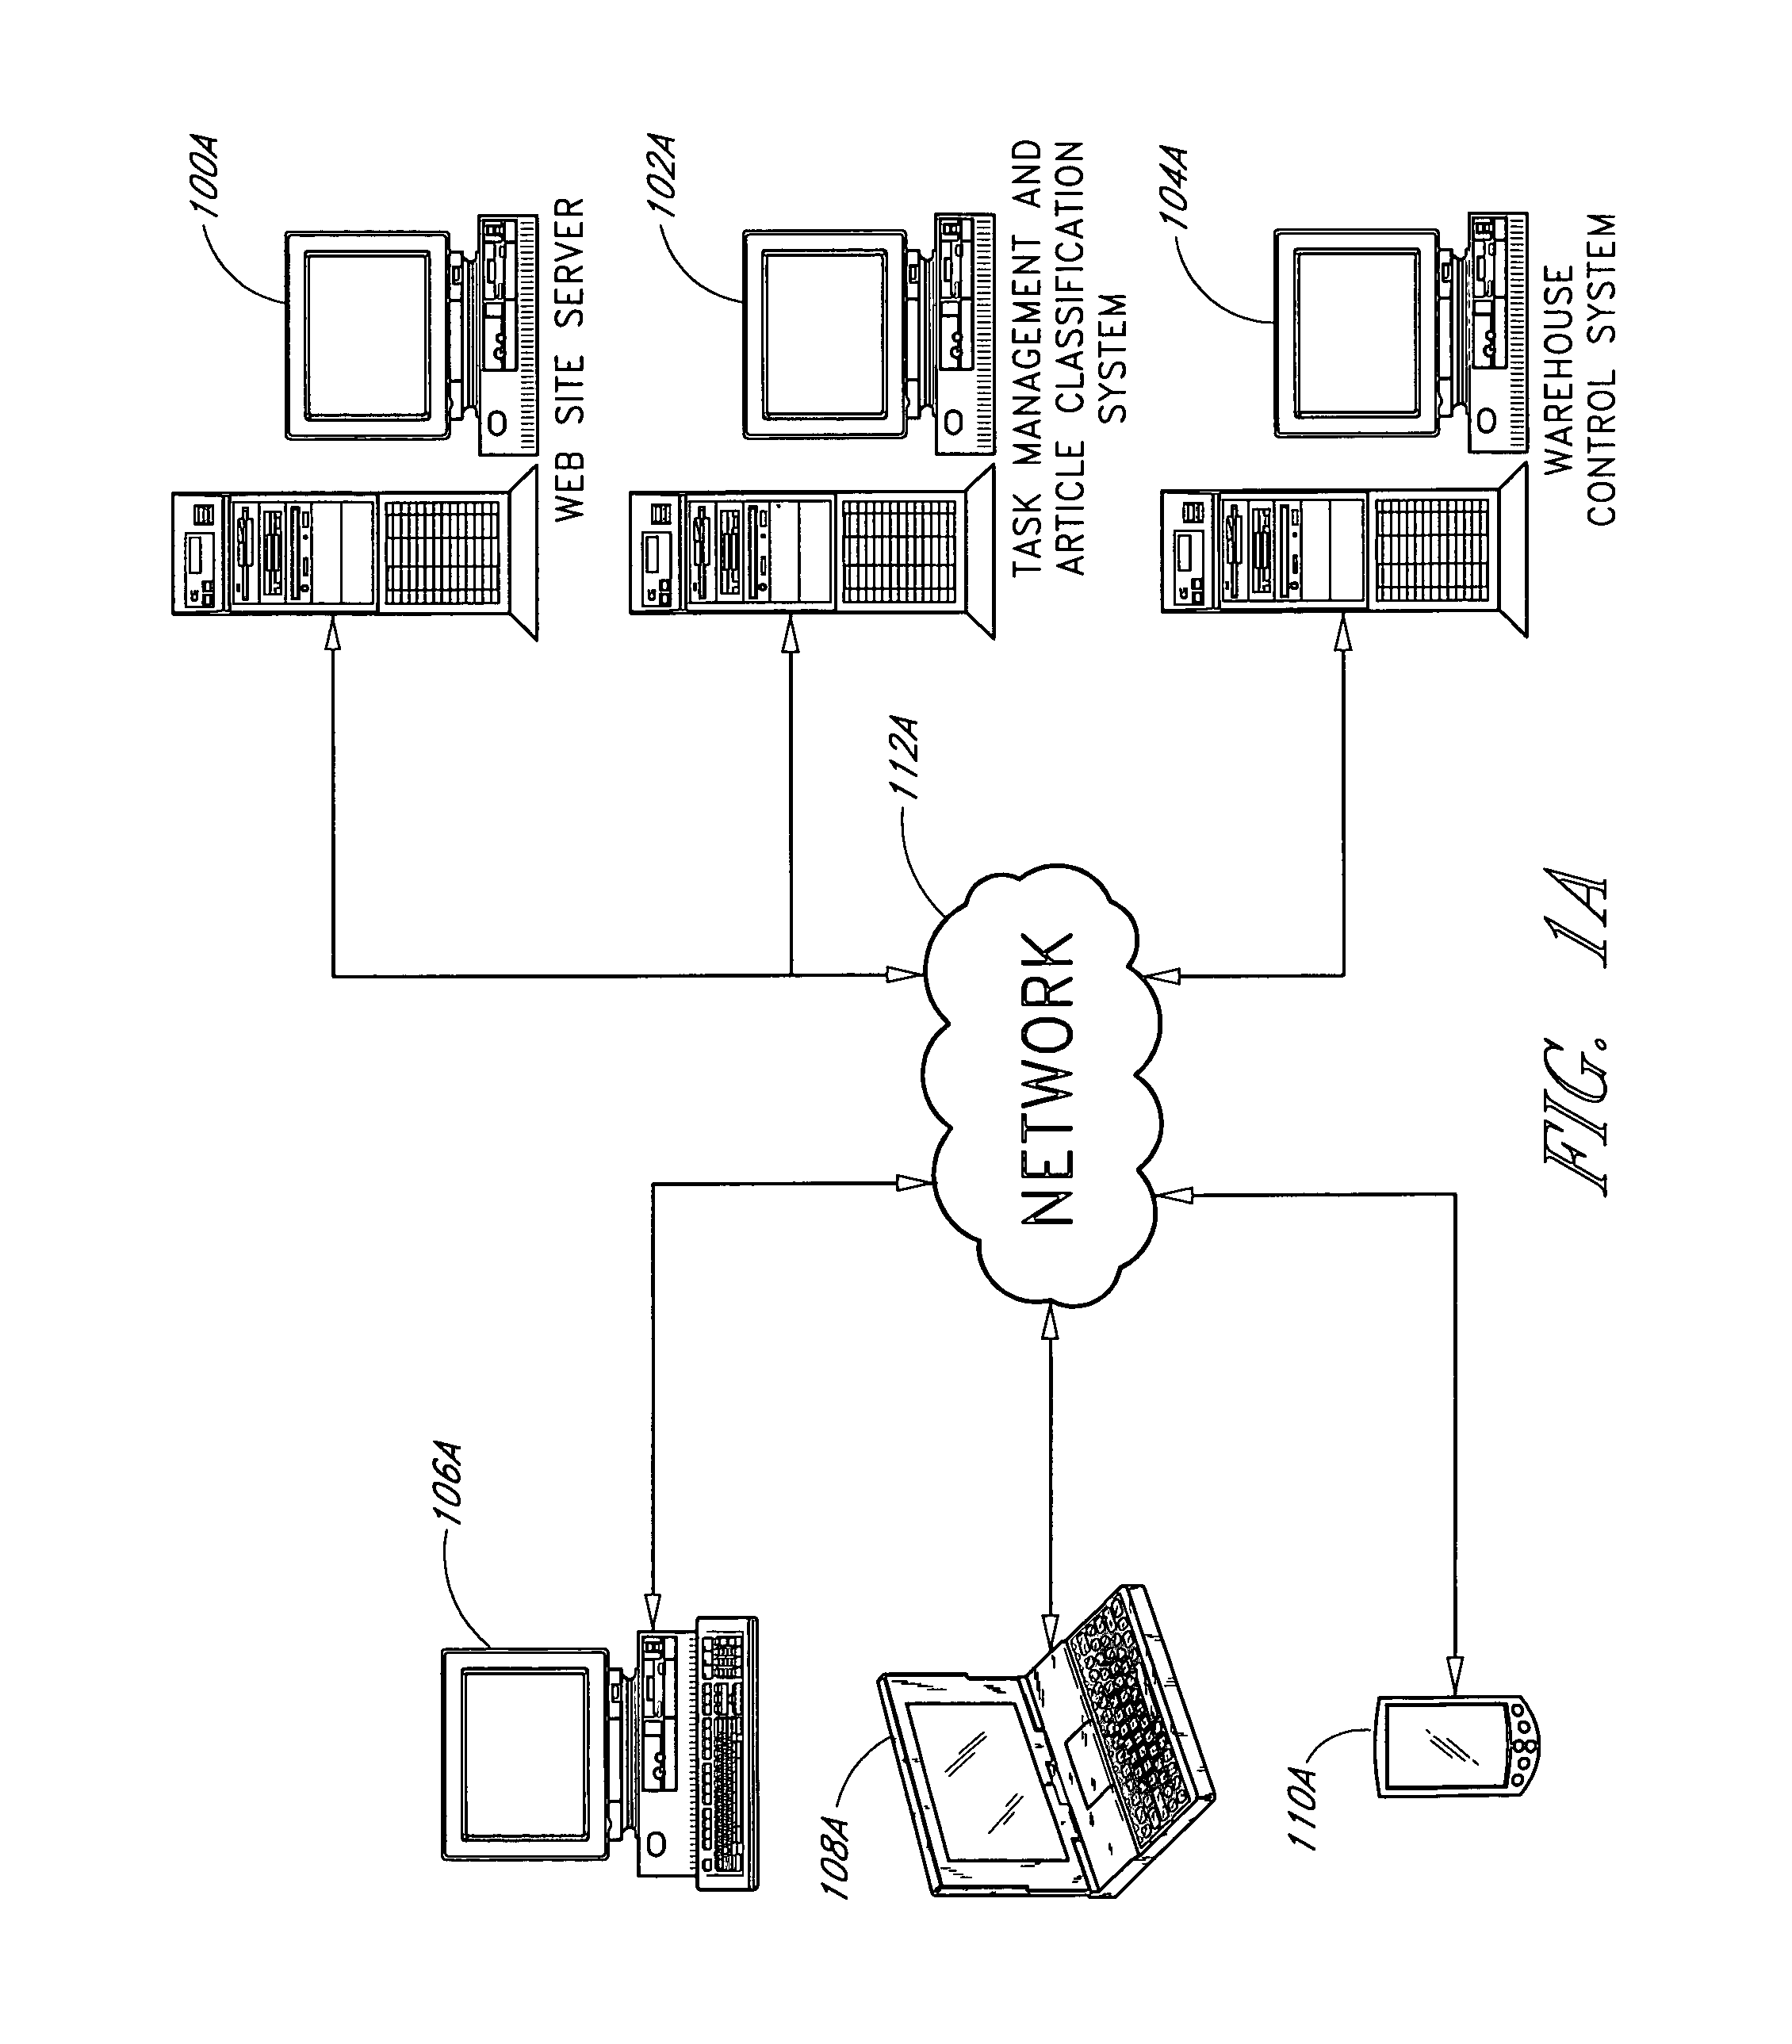 Computer controlled article classification and processing system